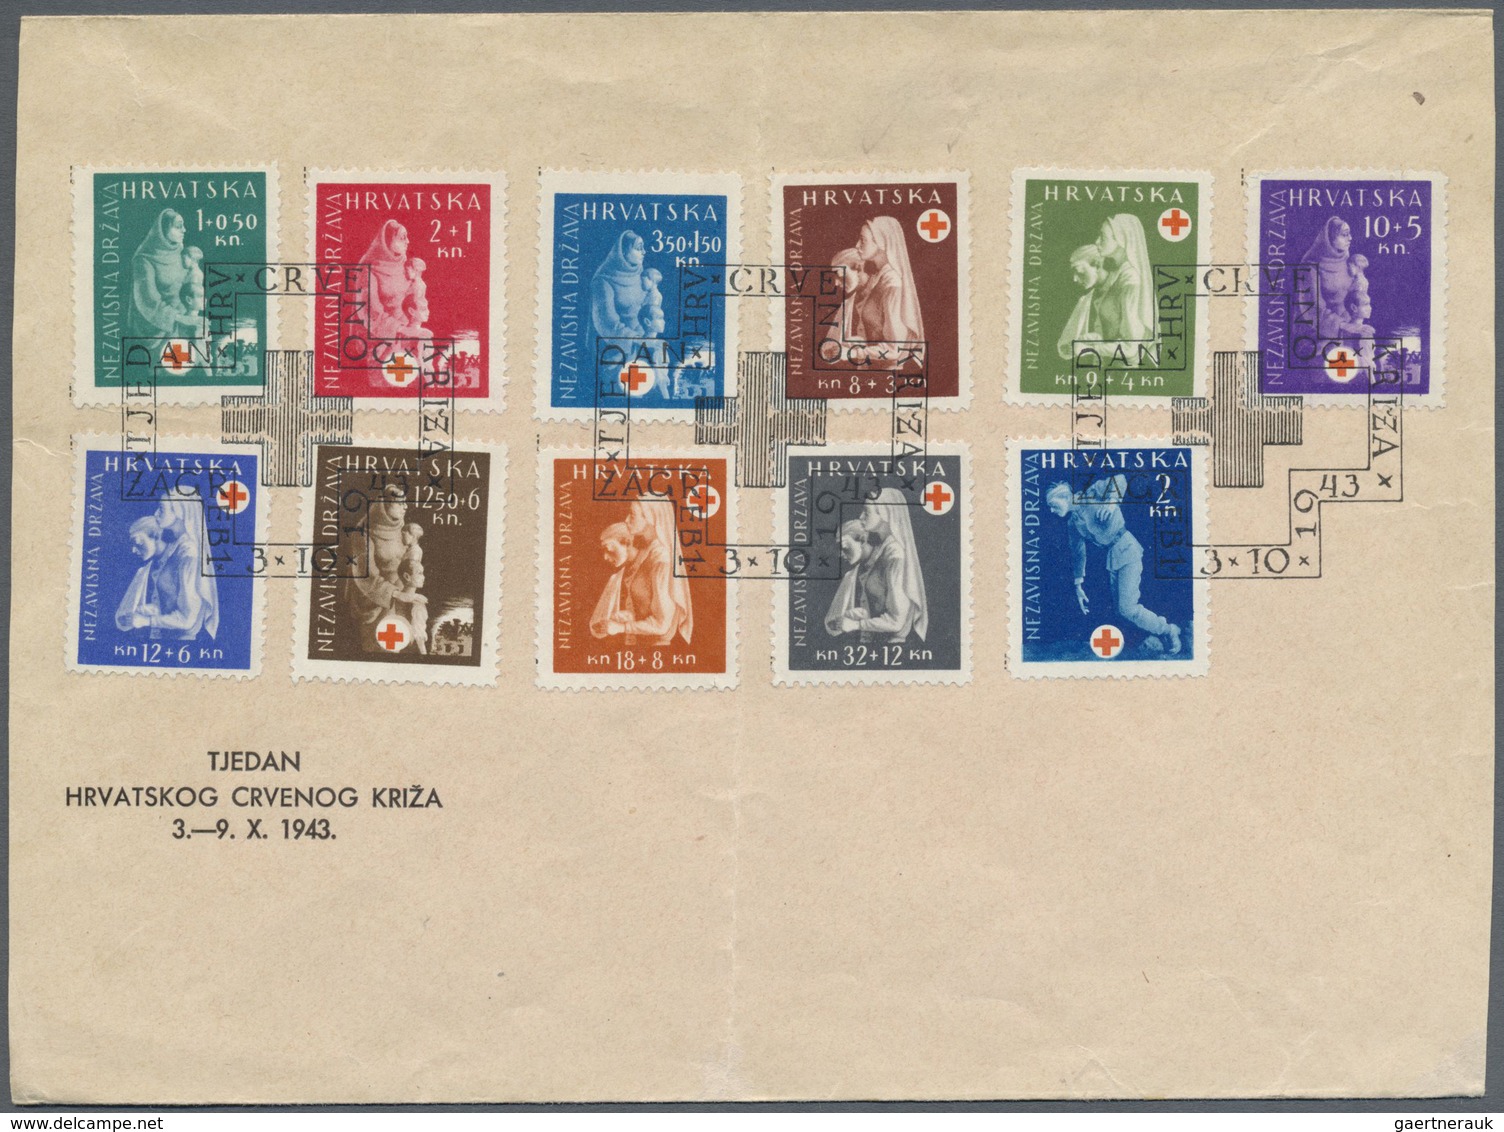 */**/O Kroatien: 1941/1945, except for a few issues complete resp overcomplete collection mint or MNH incl.